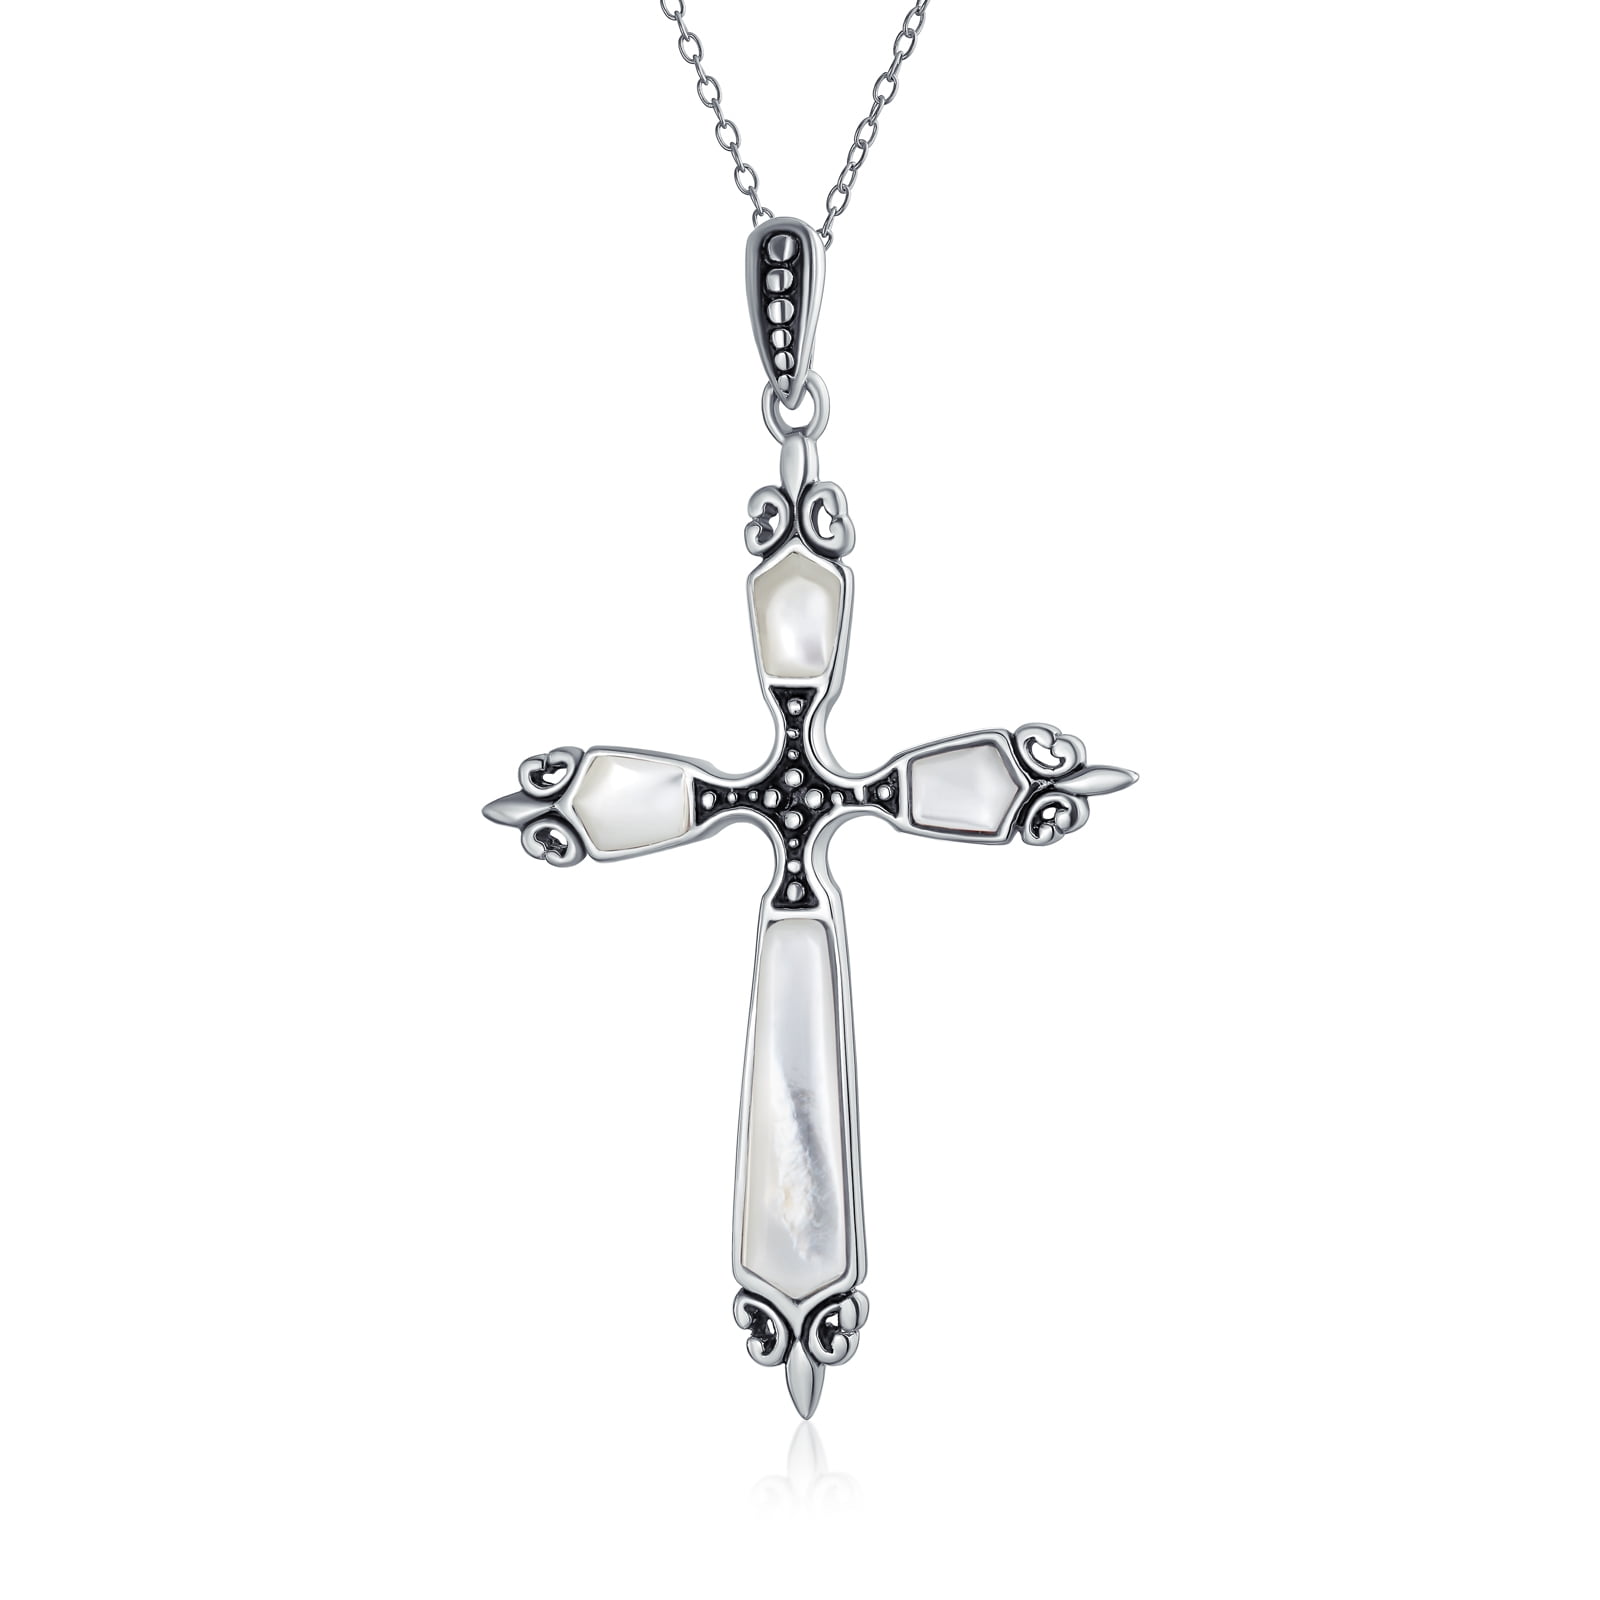 cross religious hearts pendant necklace vintage Sterling silver,925